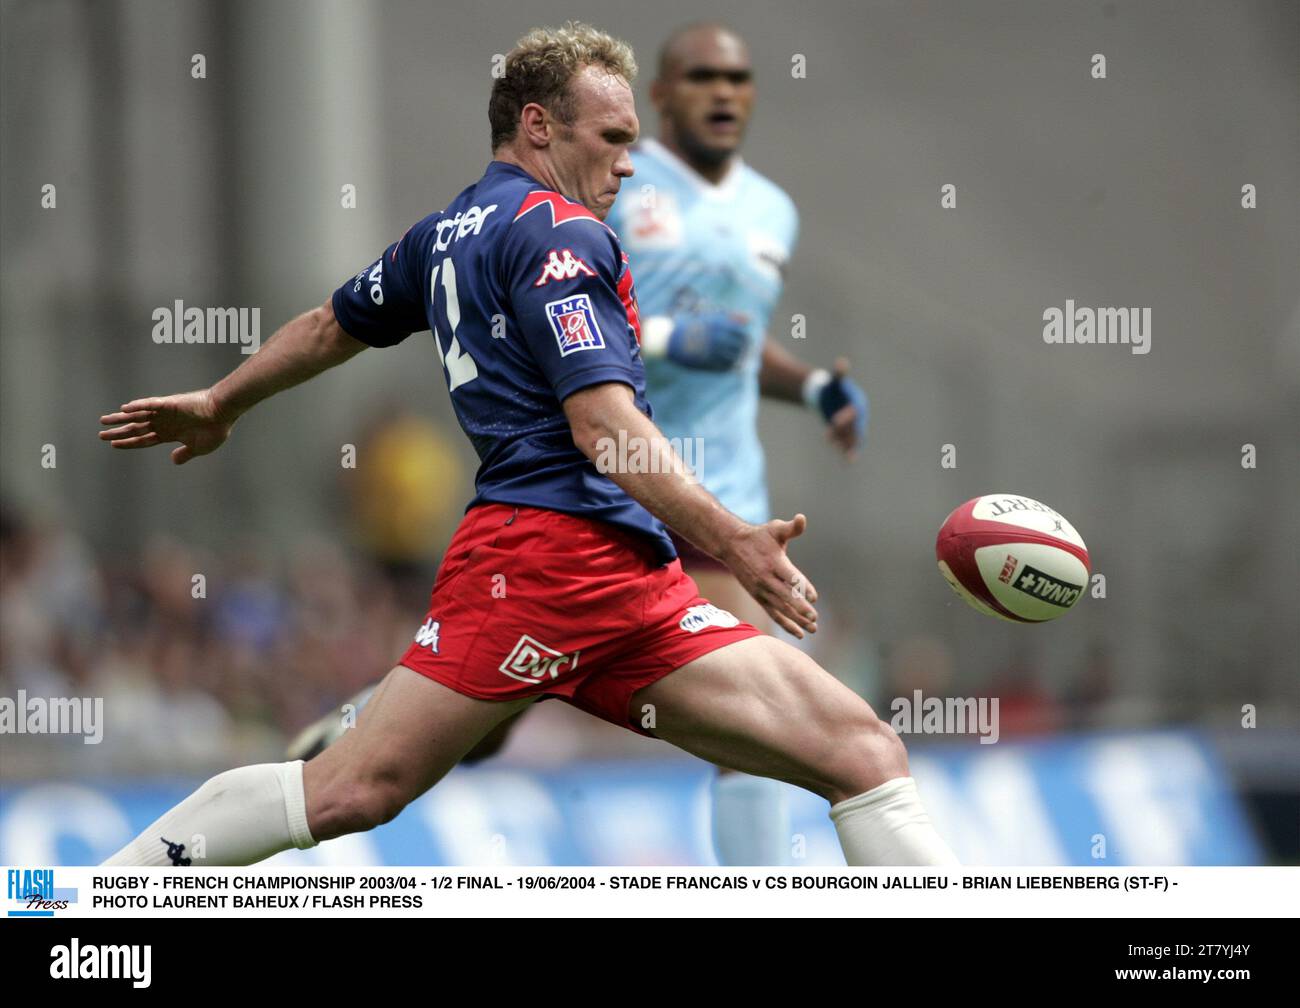 RUGBY - FRENCH CHAMPIONSHIP 2003/04 - 1/2 FINAL - 19/06/2004 - STADE FRANCAIS v CS BOURGOIN JALLIEU - BRIAN LIEBENBERG (ST-F) - PHOTO LAURENT BAHEUX / FLASH PRESS Stock Photo